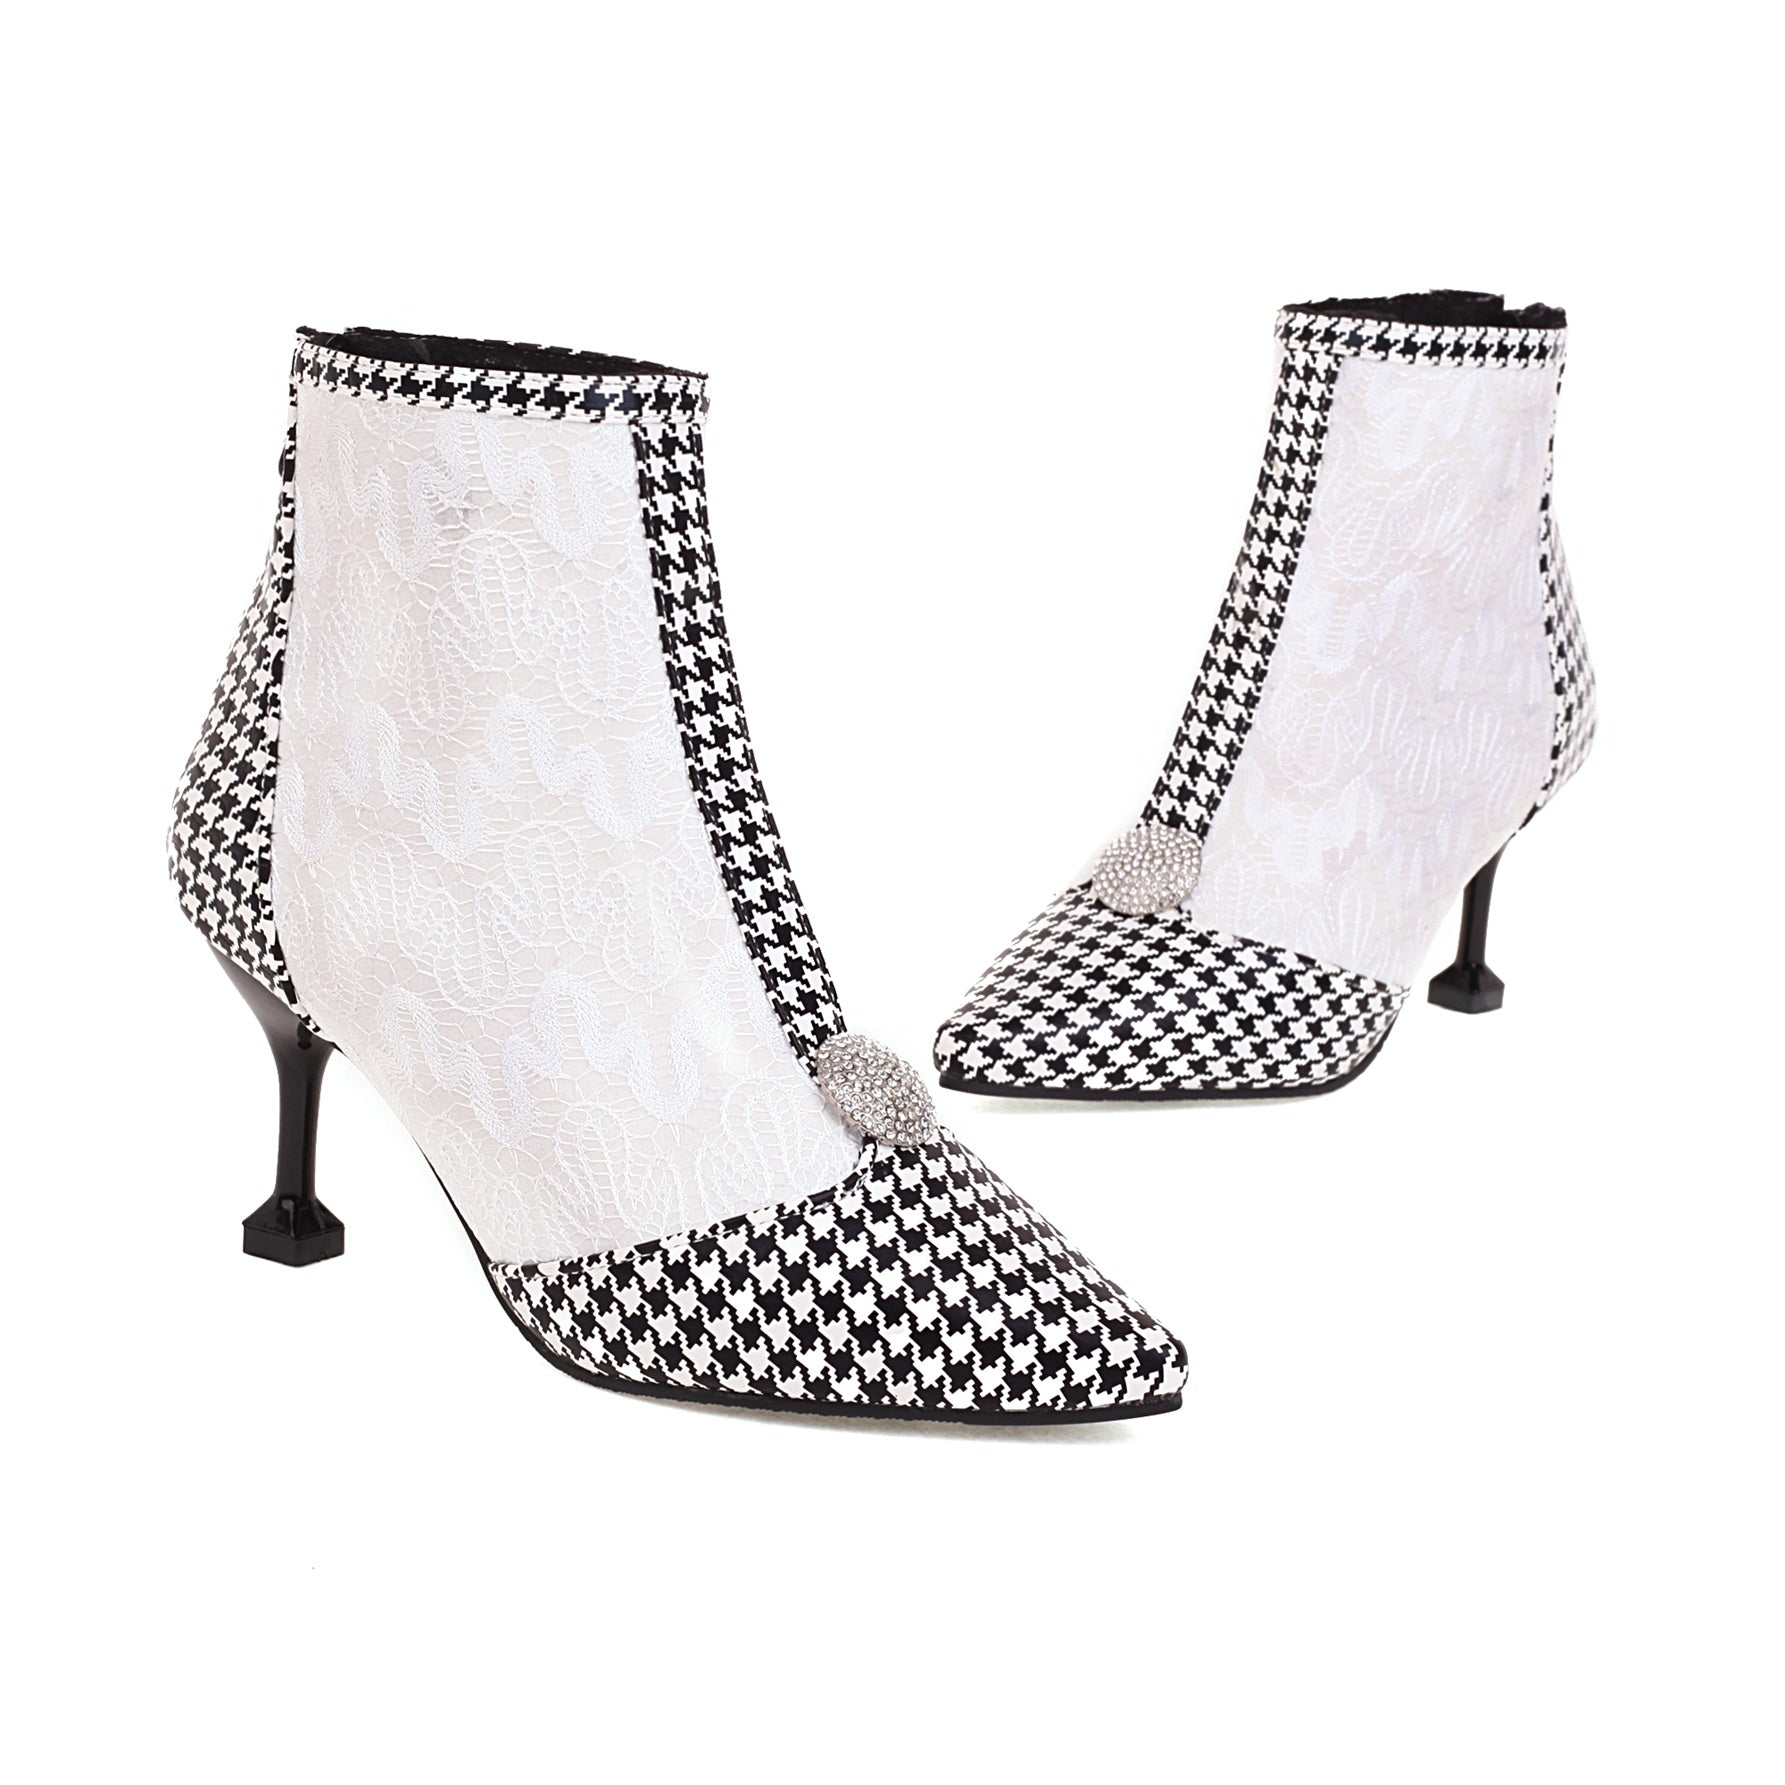 Bigsizeheels Pointed-toe Classy Ankle Boots - Houndstooth freeshipping - bigsizeheel®-size5-size15 -All Plus Sizes Available!